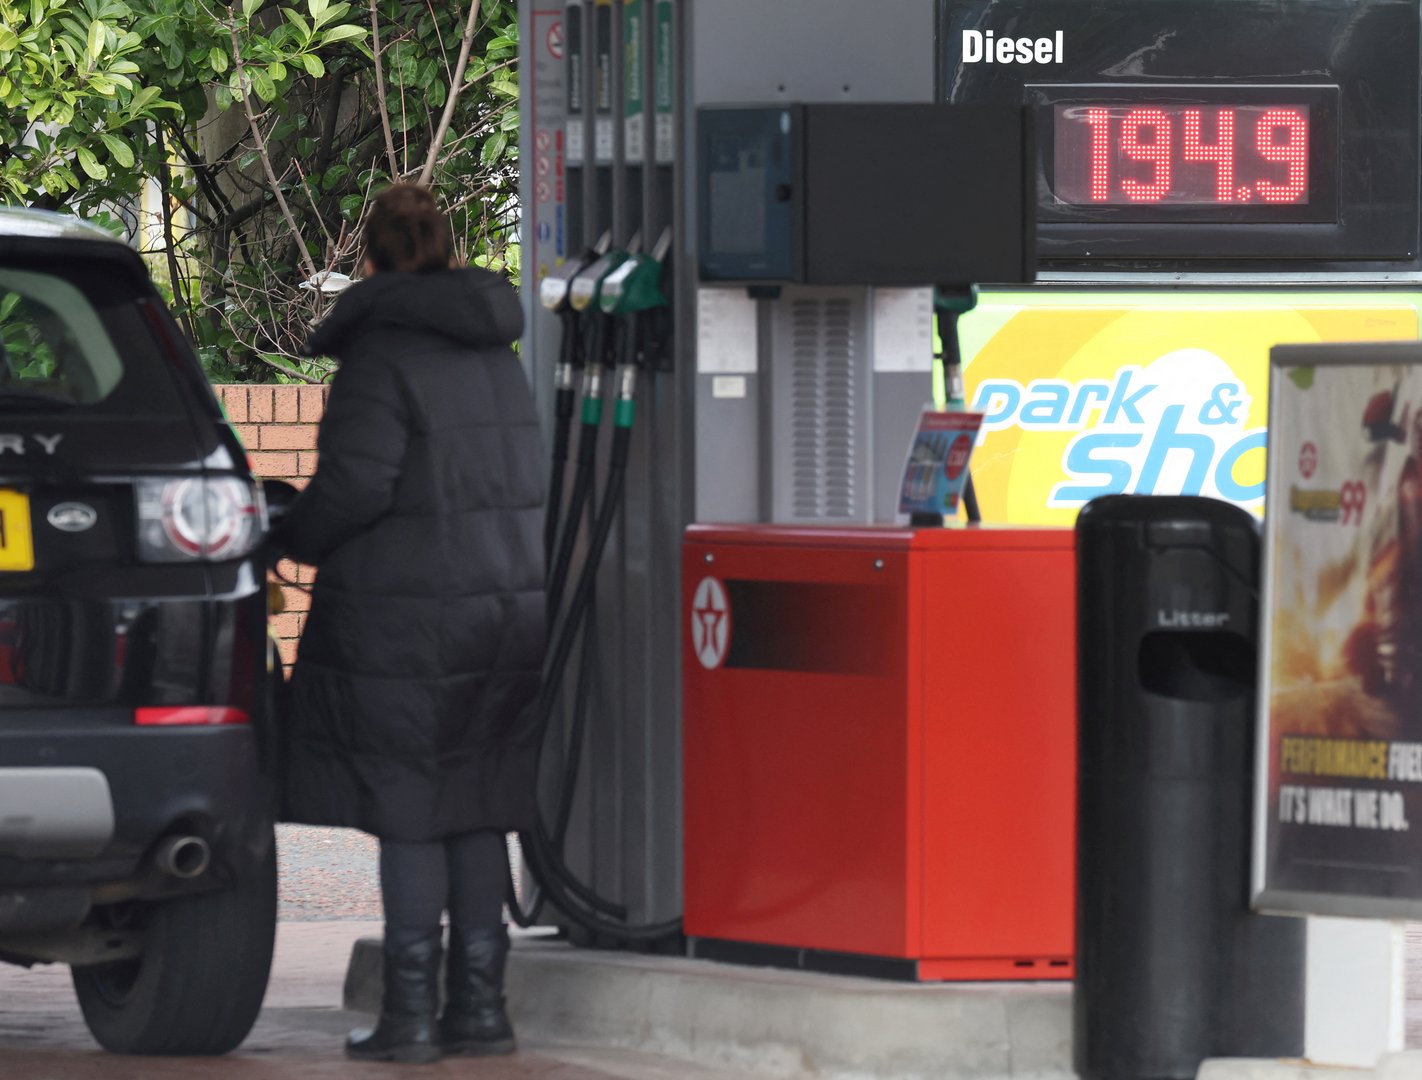 image Britain orders review of fuel market as pump prices surge